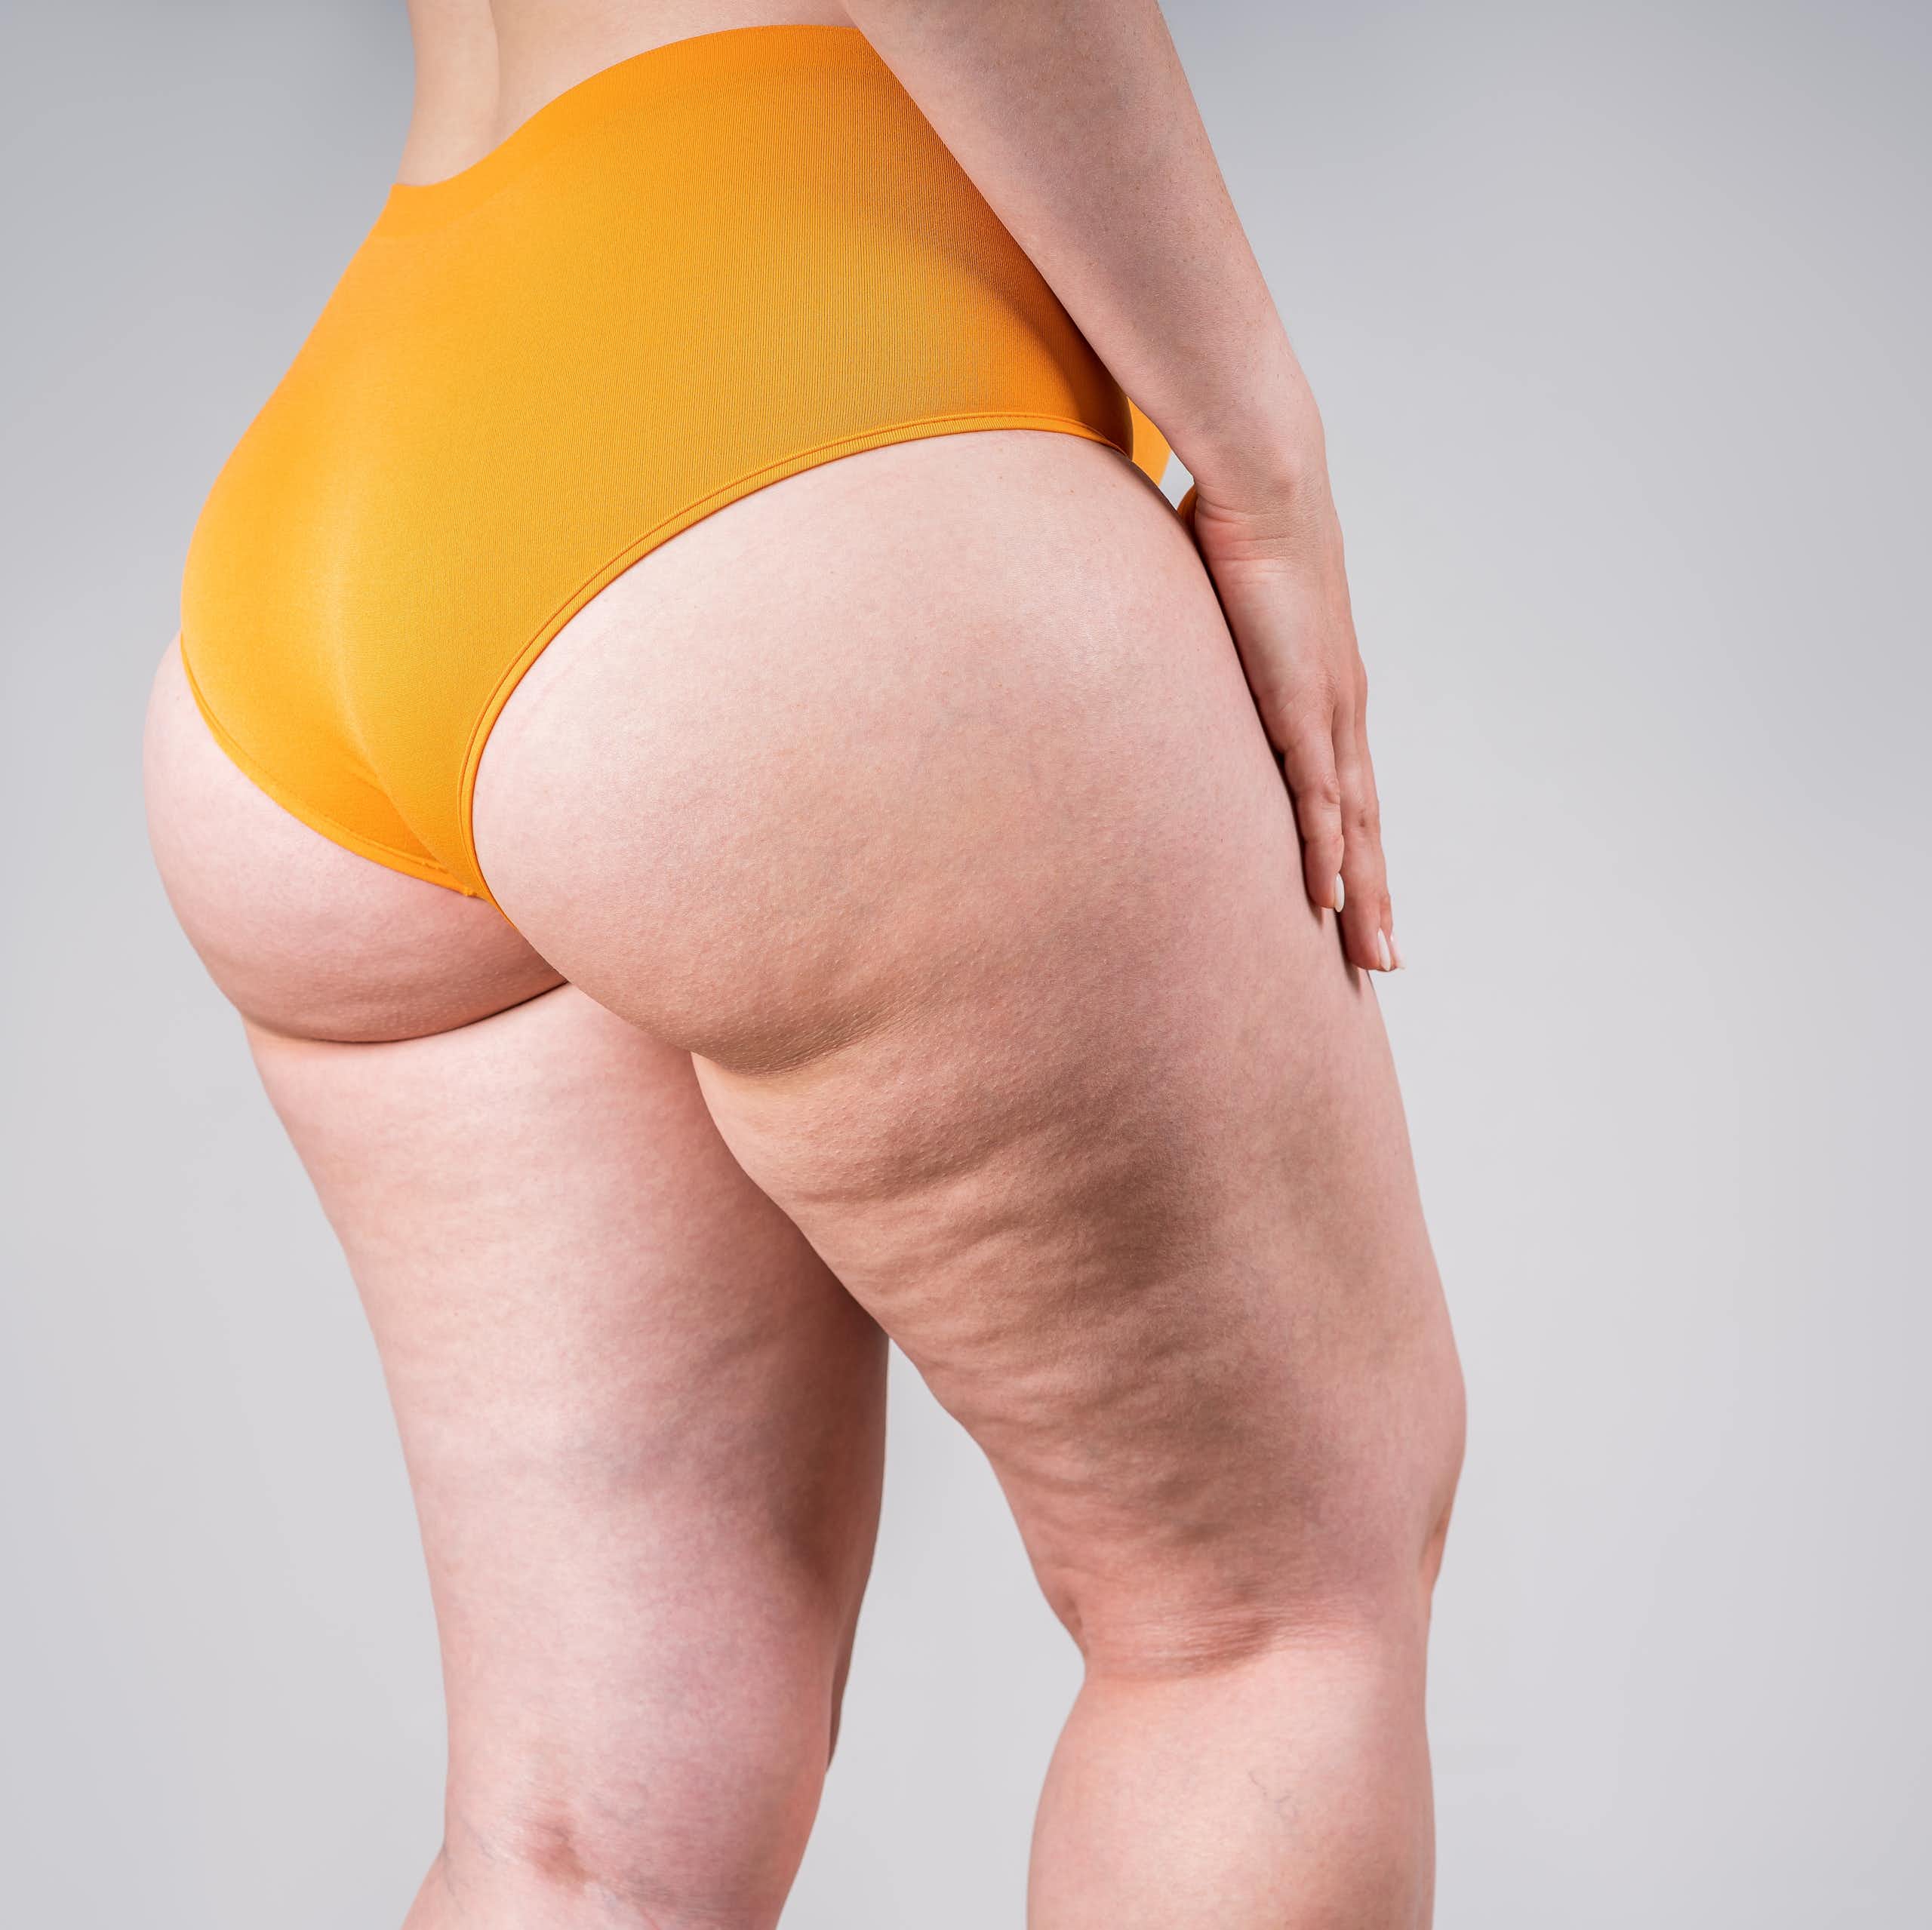 Anti-cellulite products are big business – but here’s what the science says